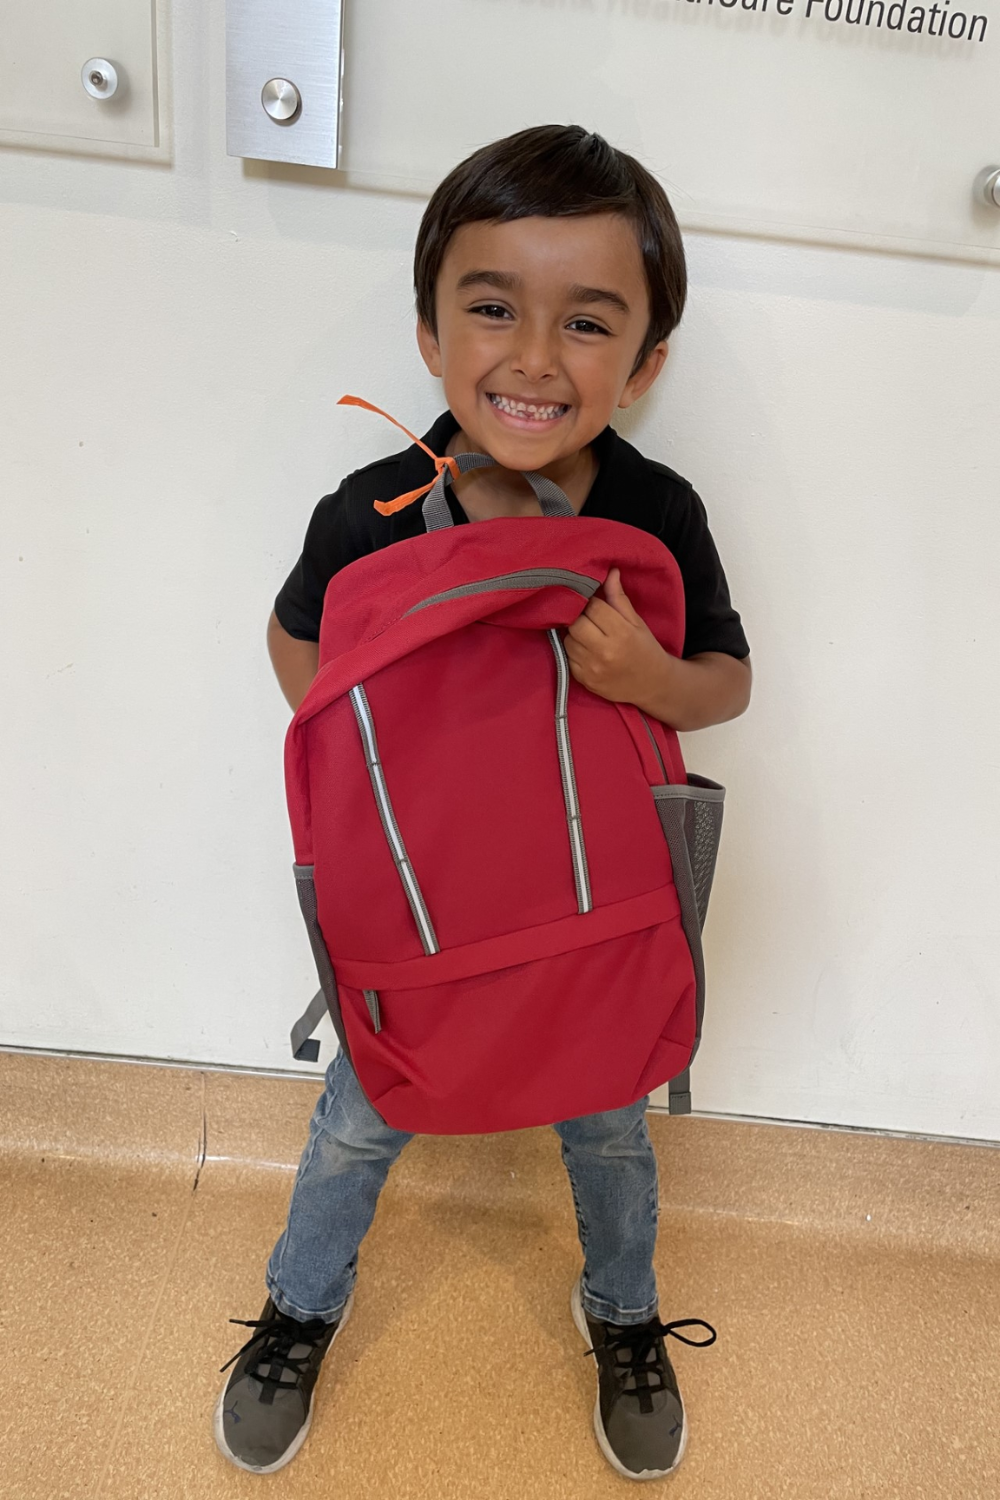 Young client holding backpack